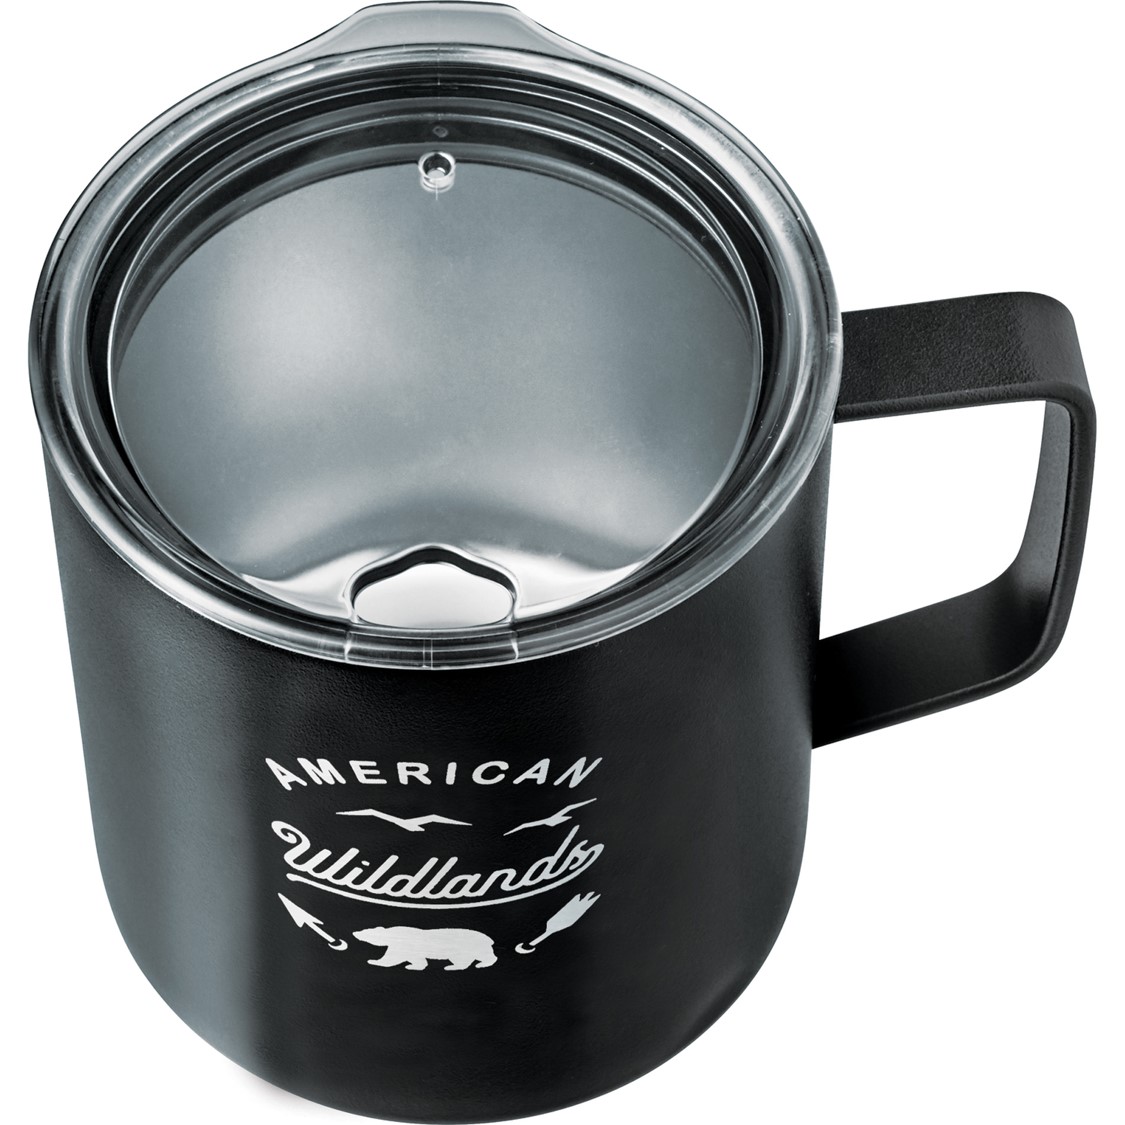 Insulated stainless steel powder coated camper mug with lid